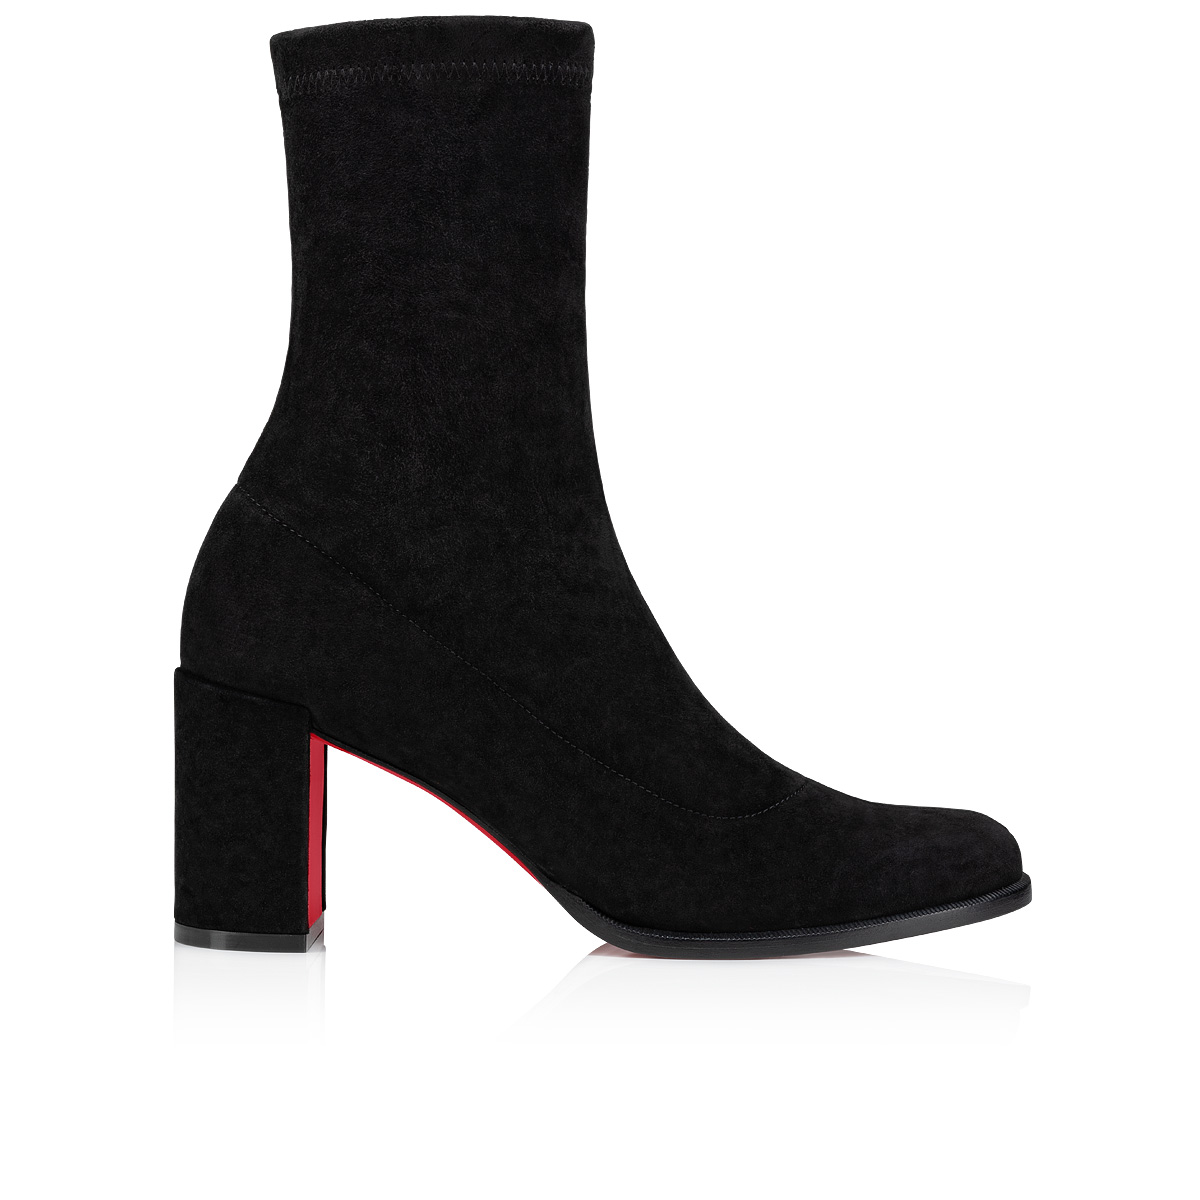 Christian Louboutin, Shoes, Brand New Christian Louboutin Louise X 0 Veau  Stretch Red Bottom Boots